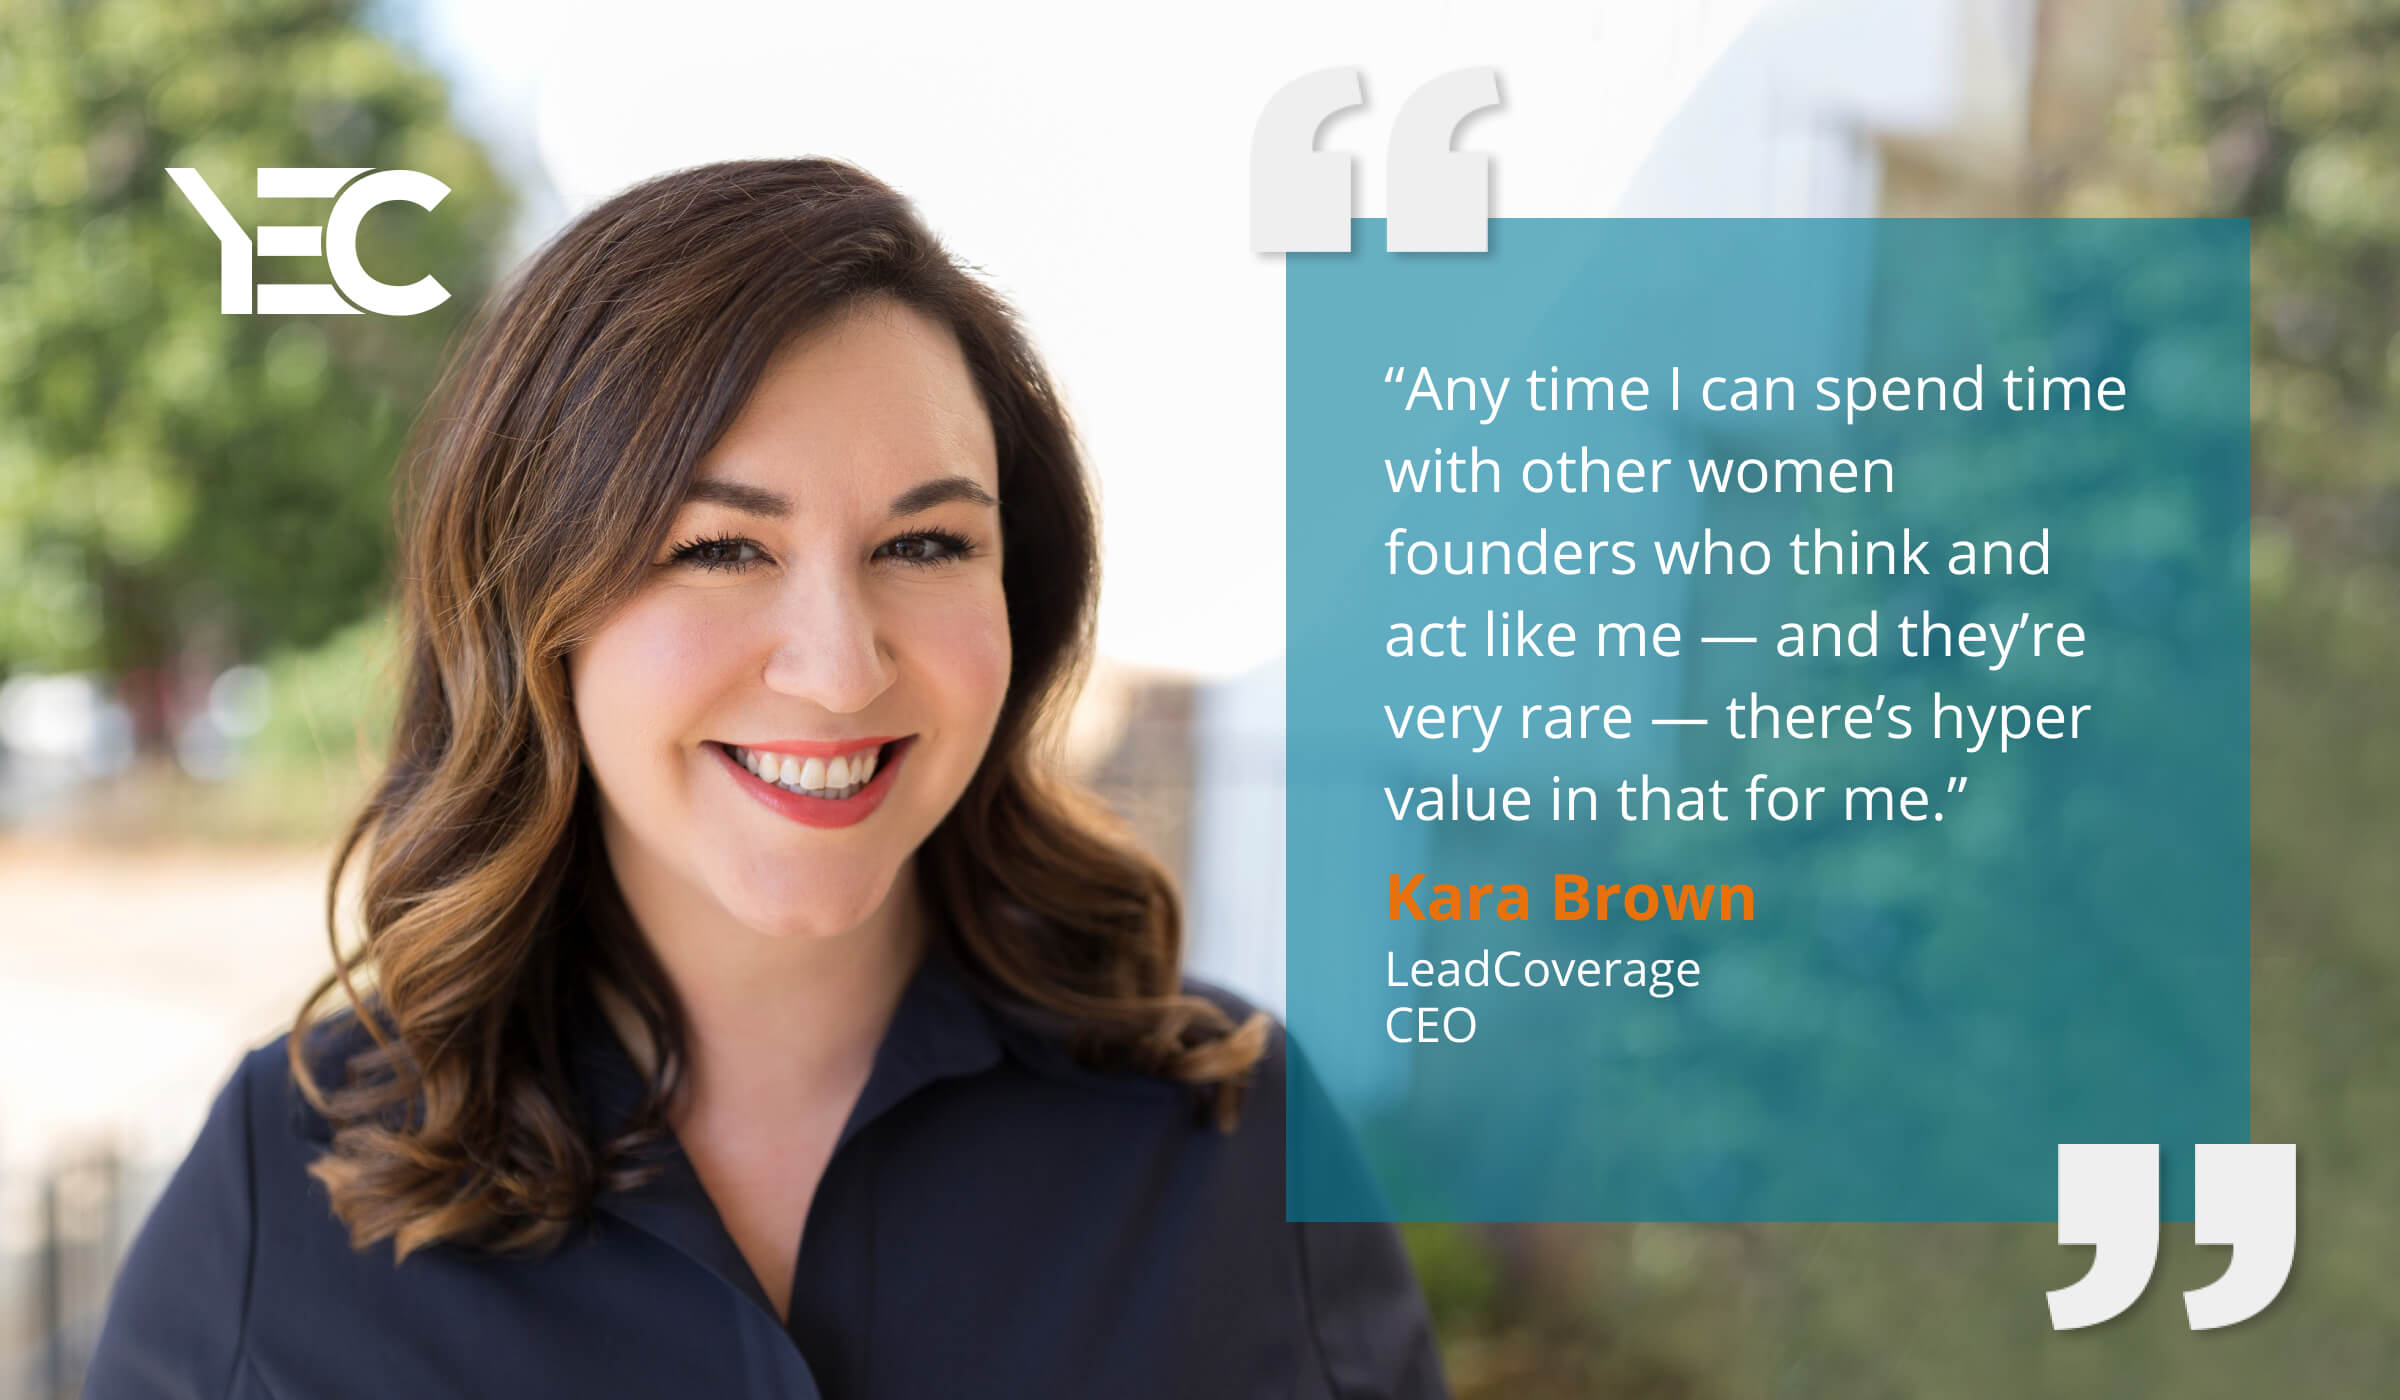 For Kara Brown, YEC Provides Unparalleled Access to Elite Group of Female Founders